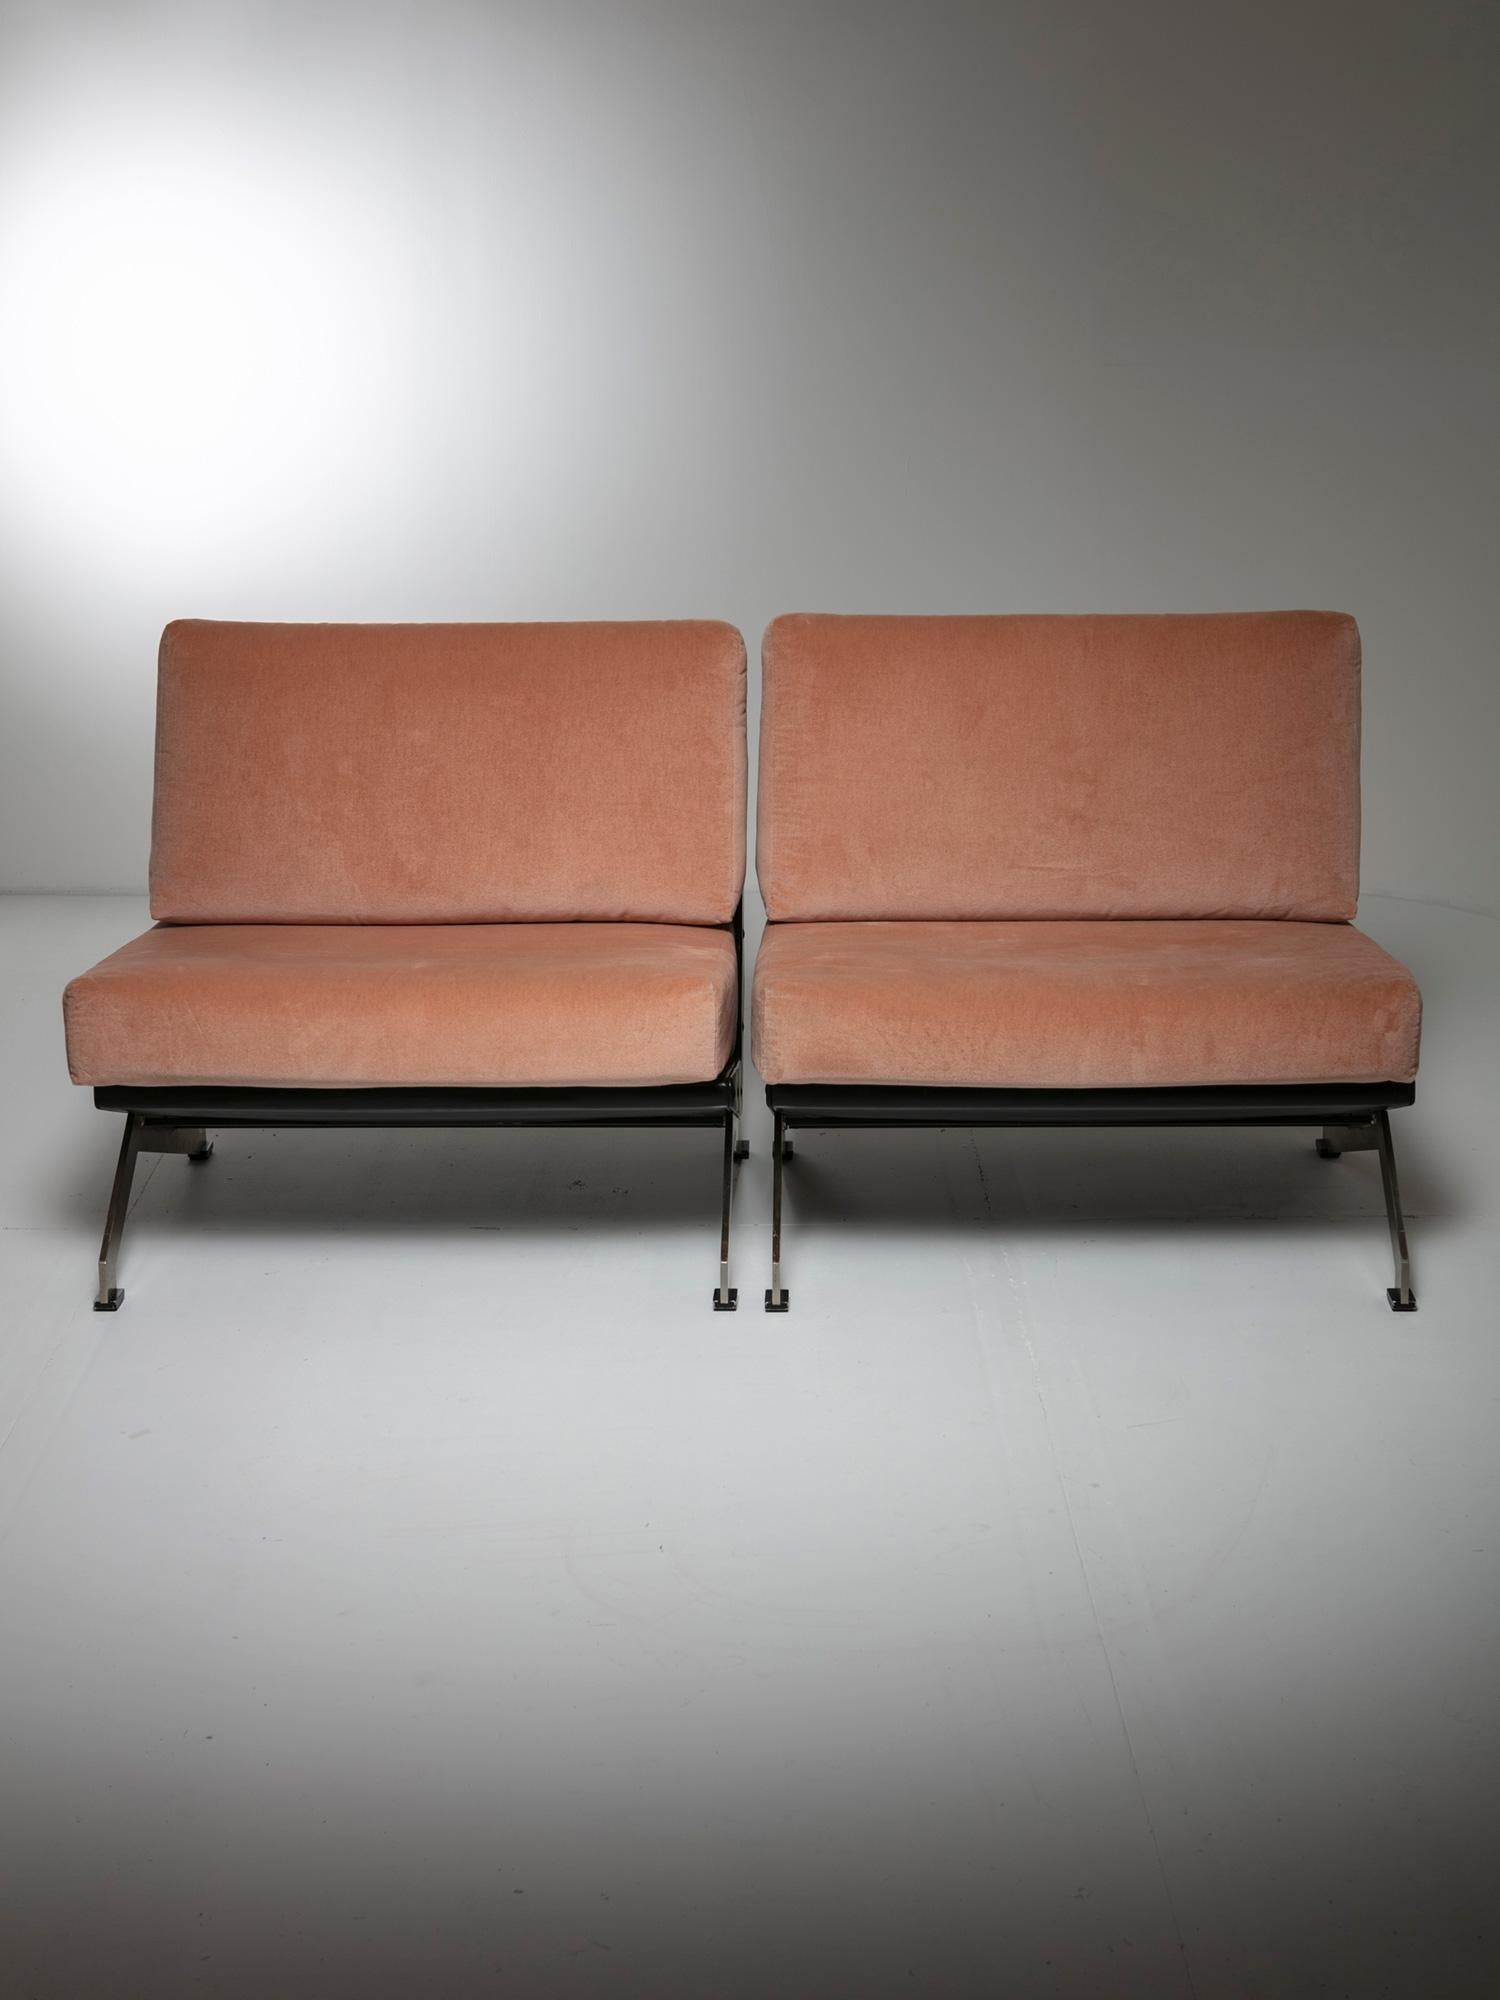 Set of two lounge chairs by Gianni Moscatelli for Formanova.
Aluminum base, artificial leather and pink Dedar velvet for this really comfortable seat. These pieces can also be used without pillows, showing an extremely up-front design.